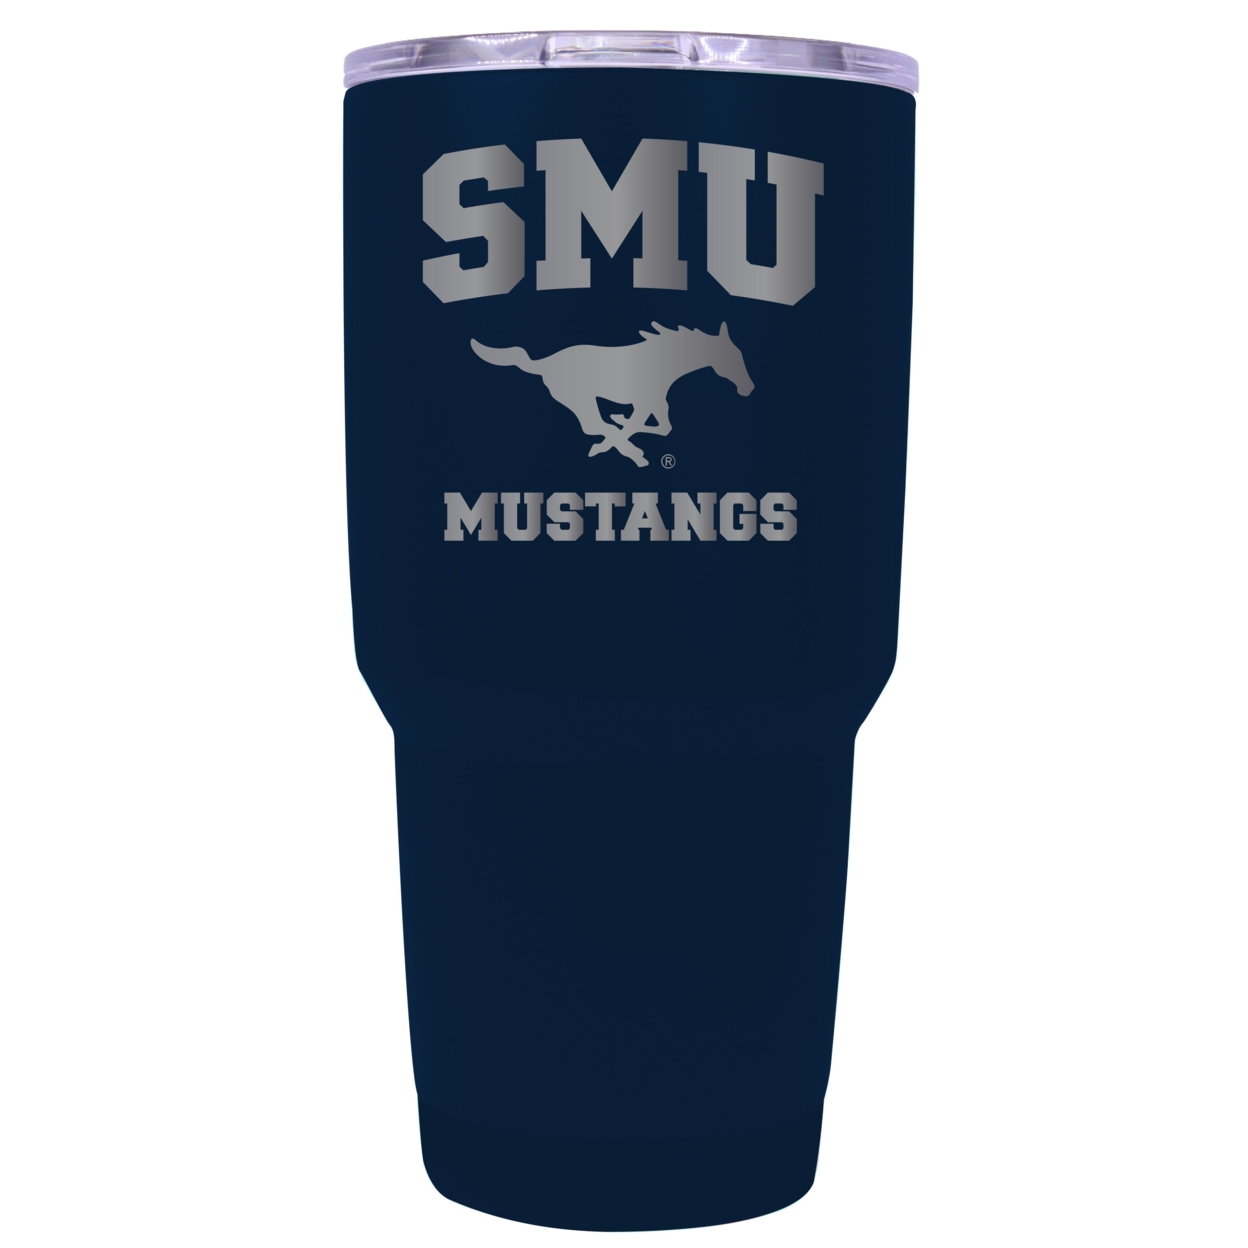 Southern Methodist University 24 Oz Laser Engraved Stainless Steel Insulated Tumbler - Choose Your Color. - Navy